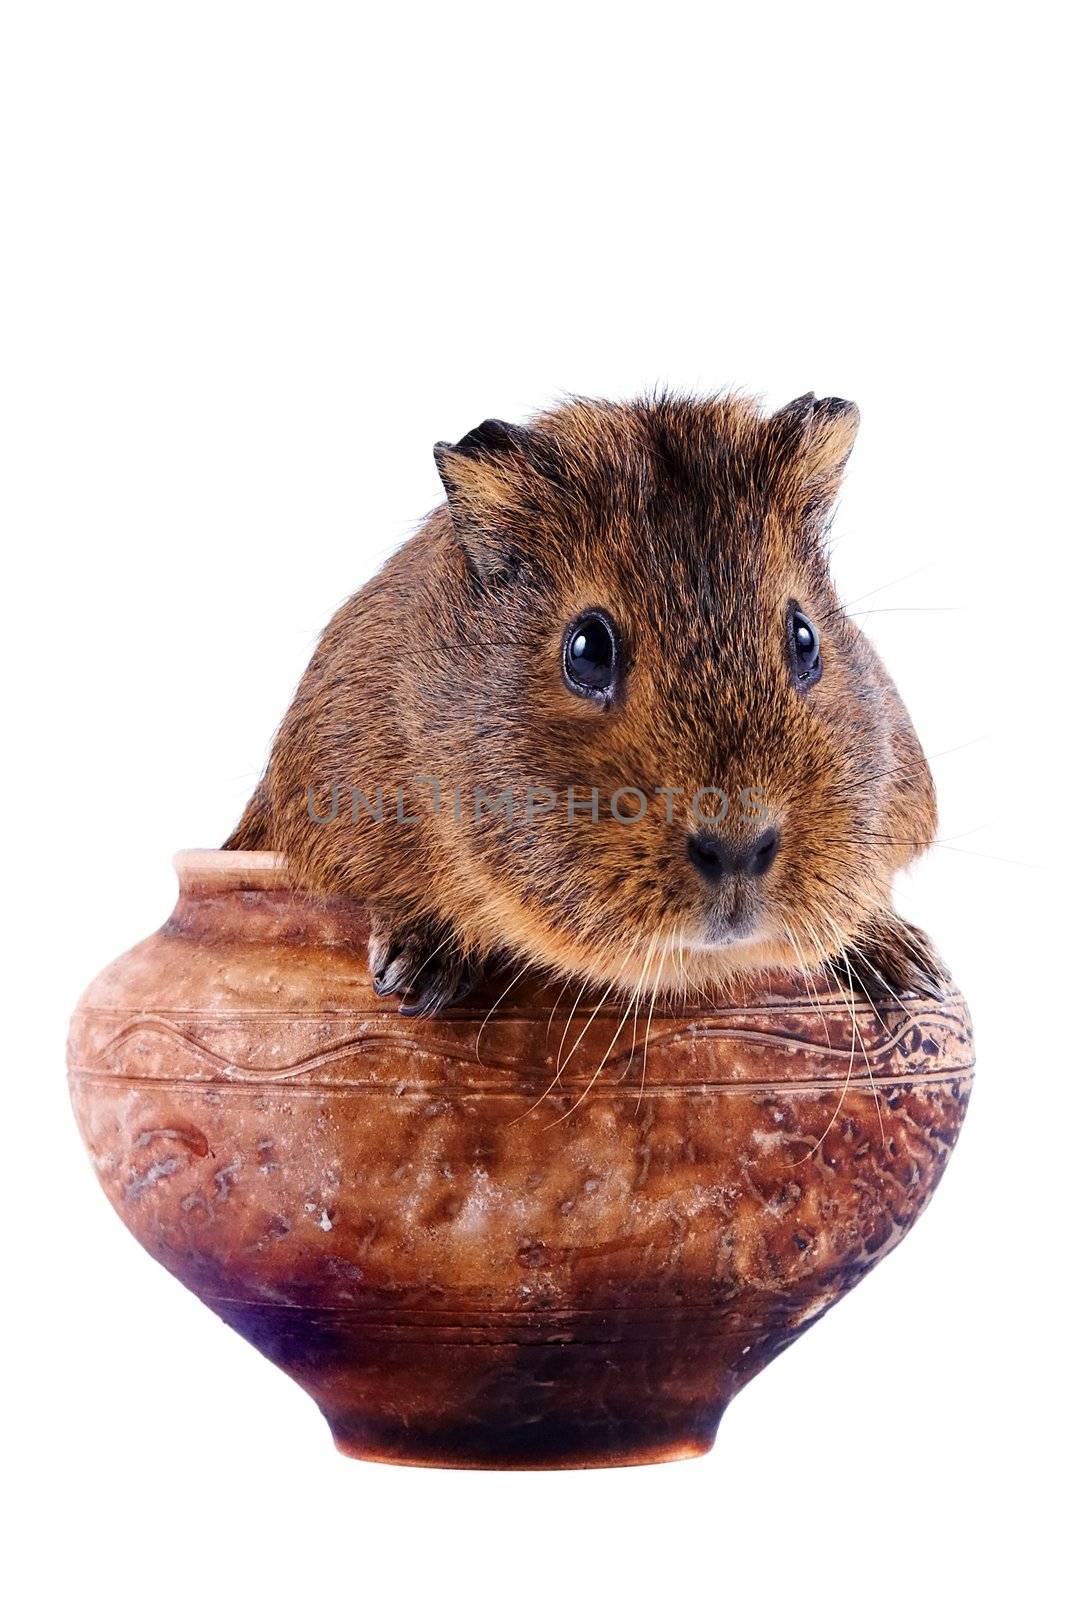 The guinea pig sits in a clay pot on a white background